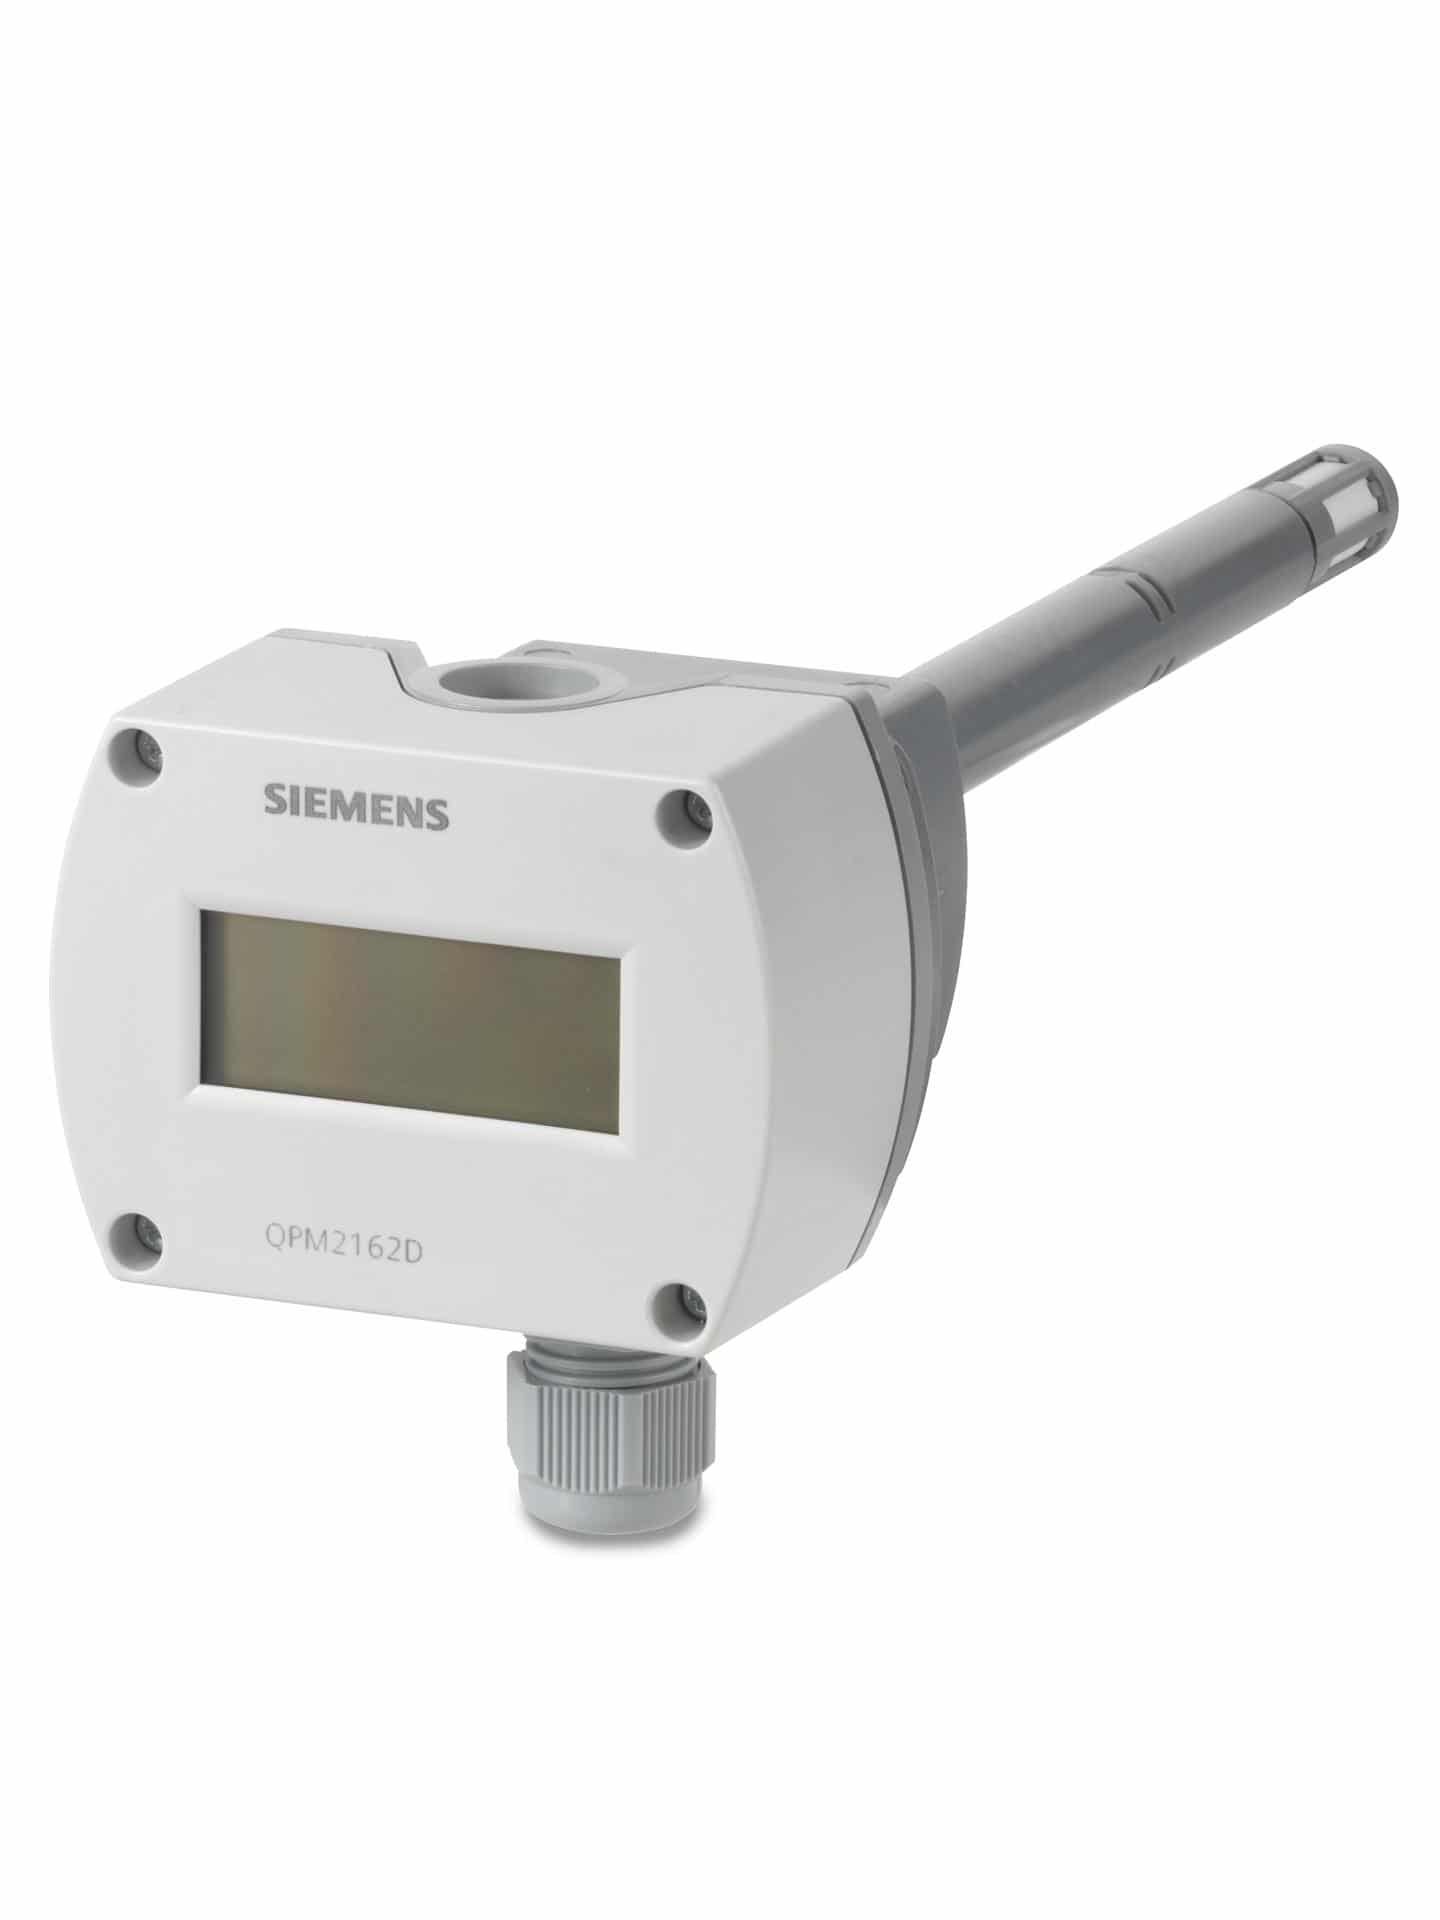 Siemens Duct Air Quality Sensor CO2 & Temperature with Display – QPM2162D